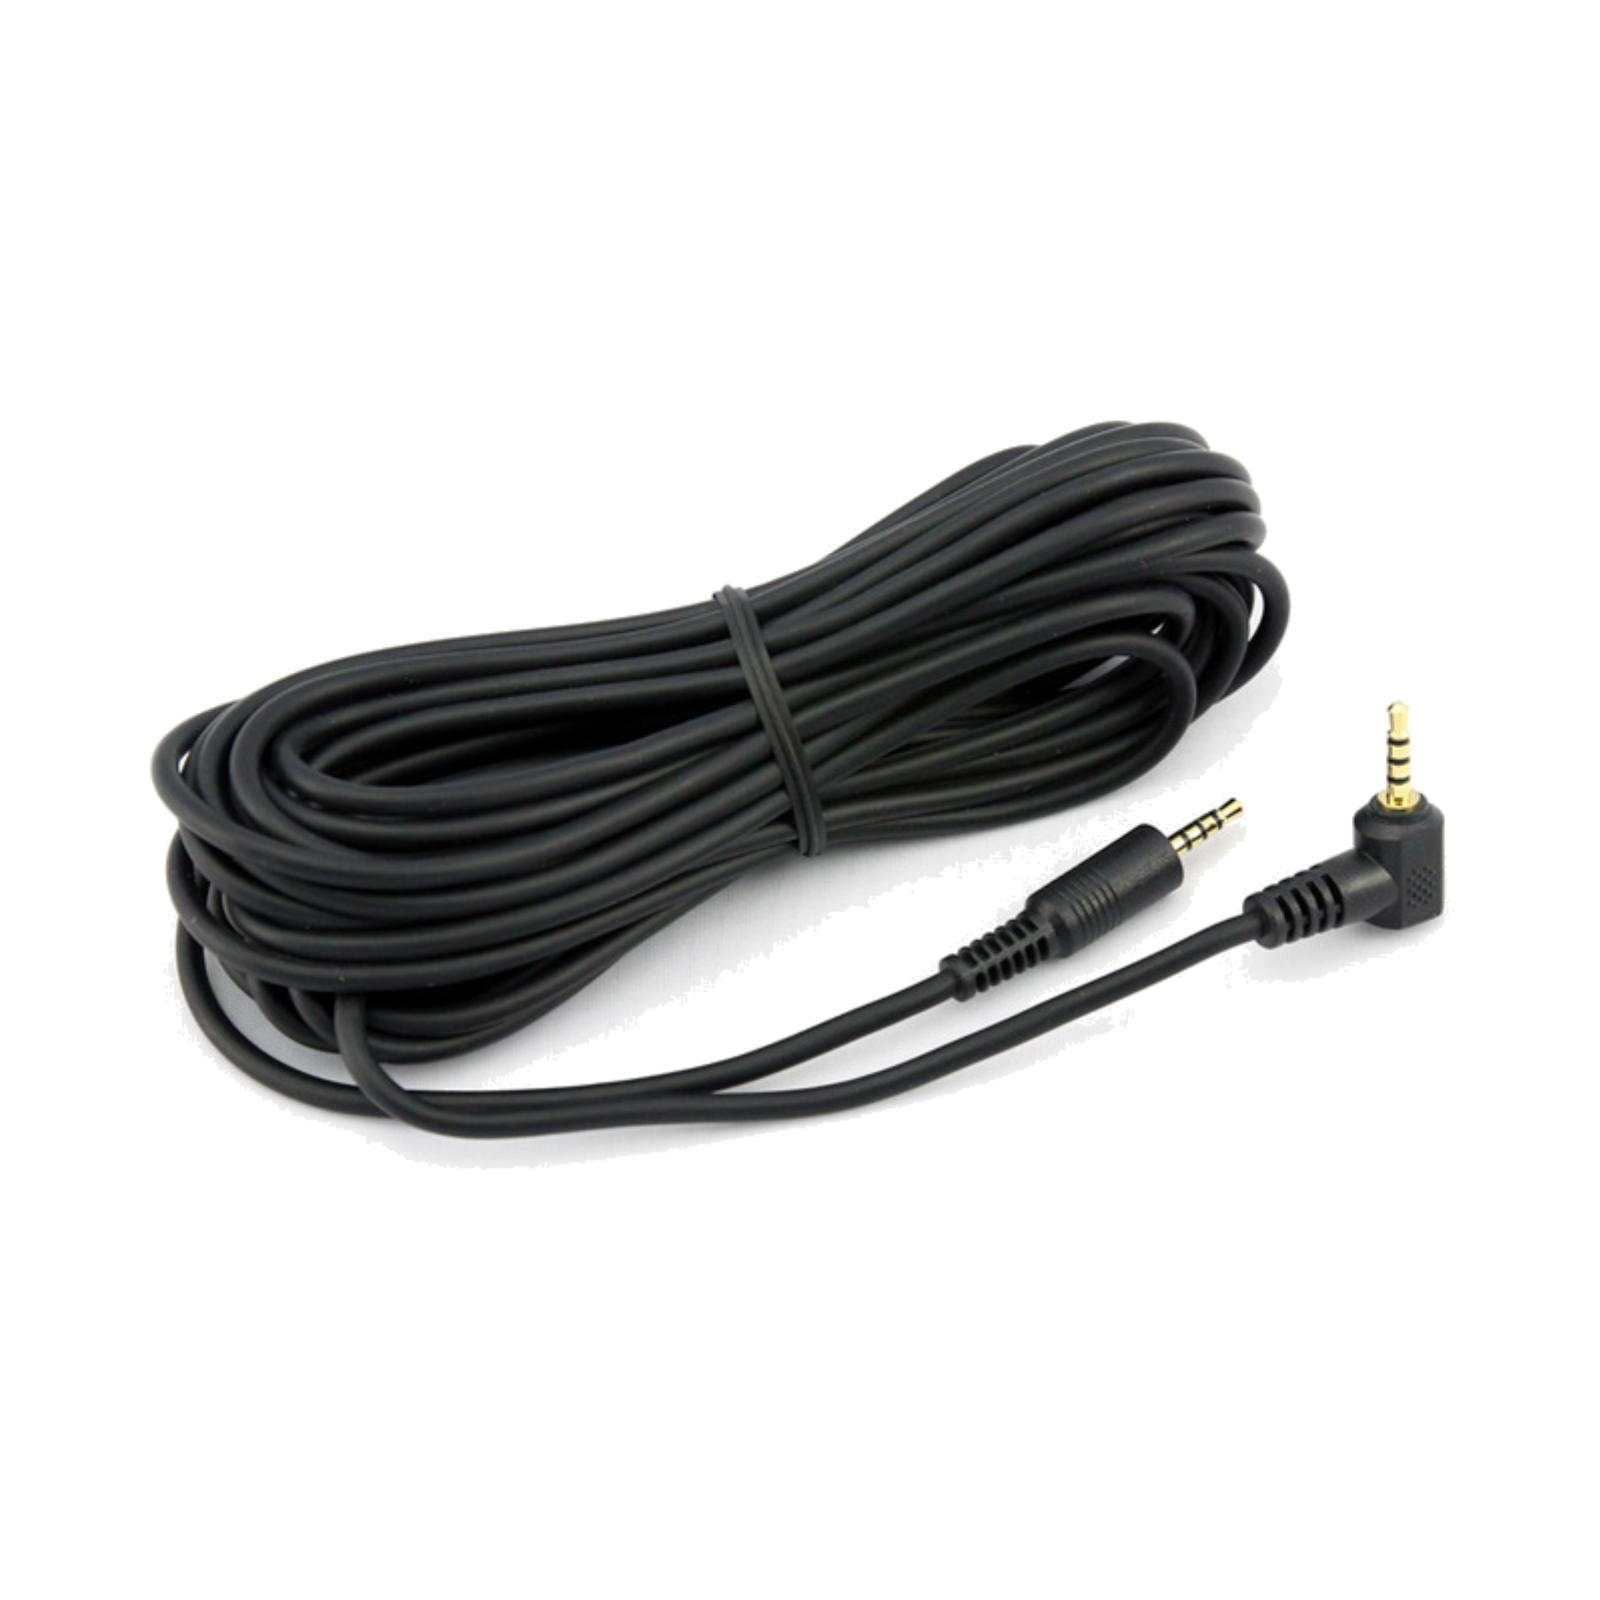 BlackVue 6m Analog Video Cable